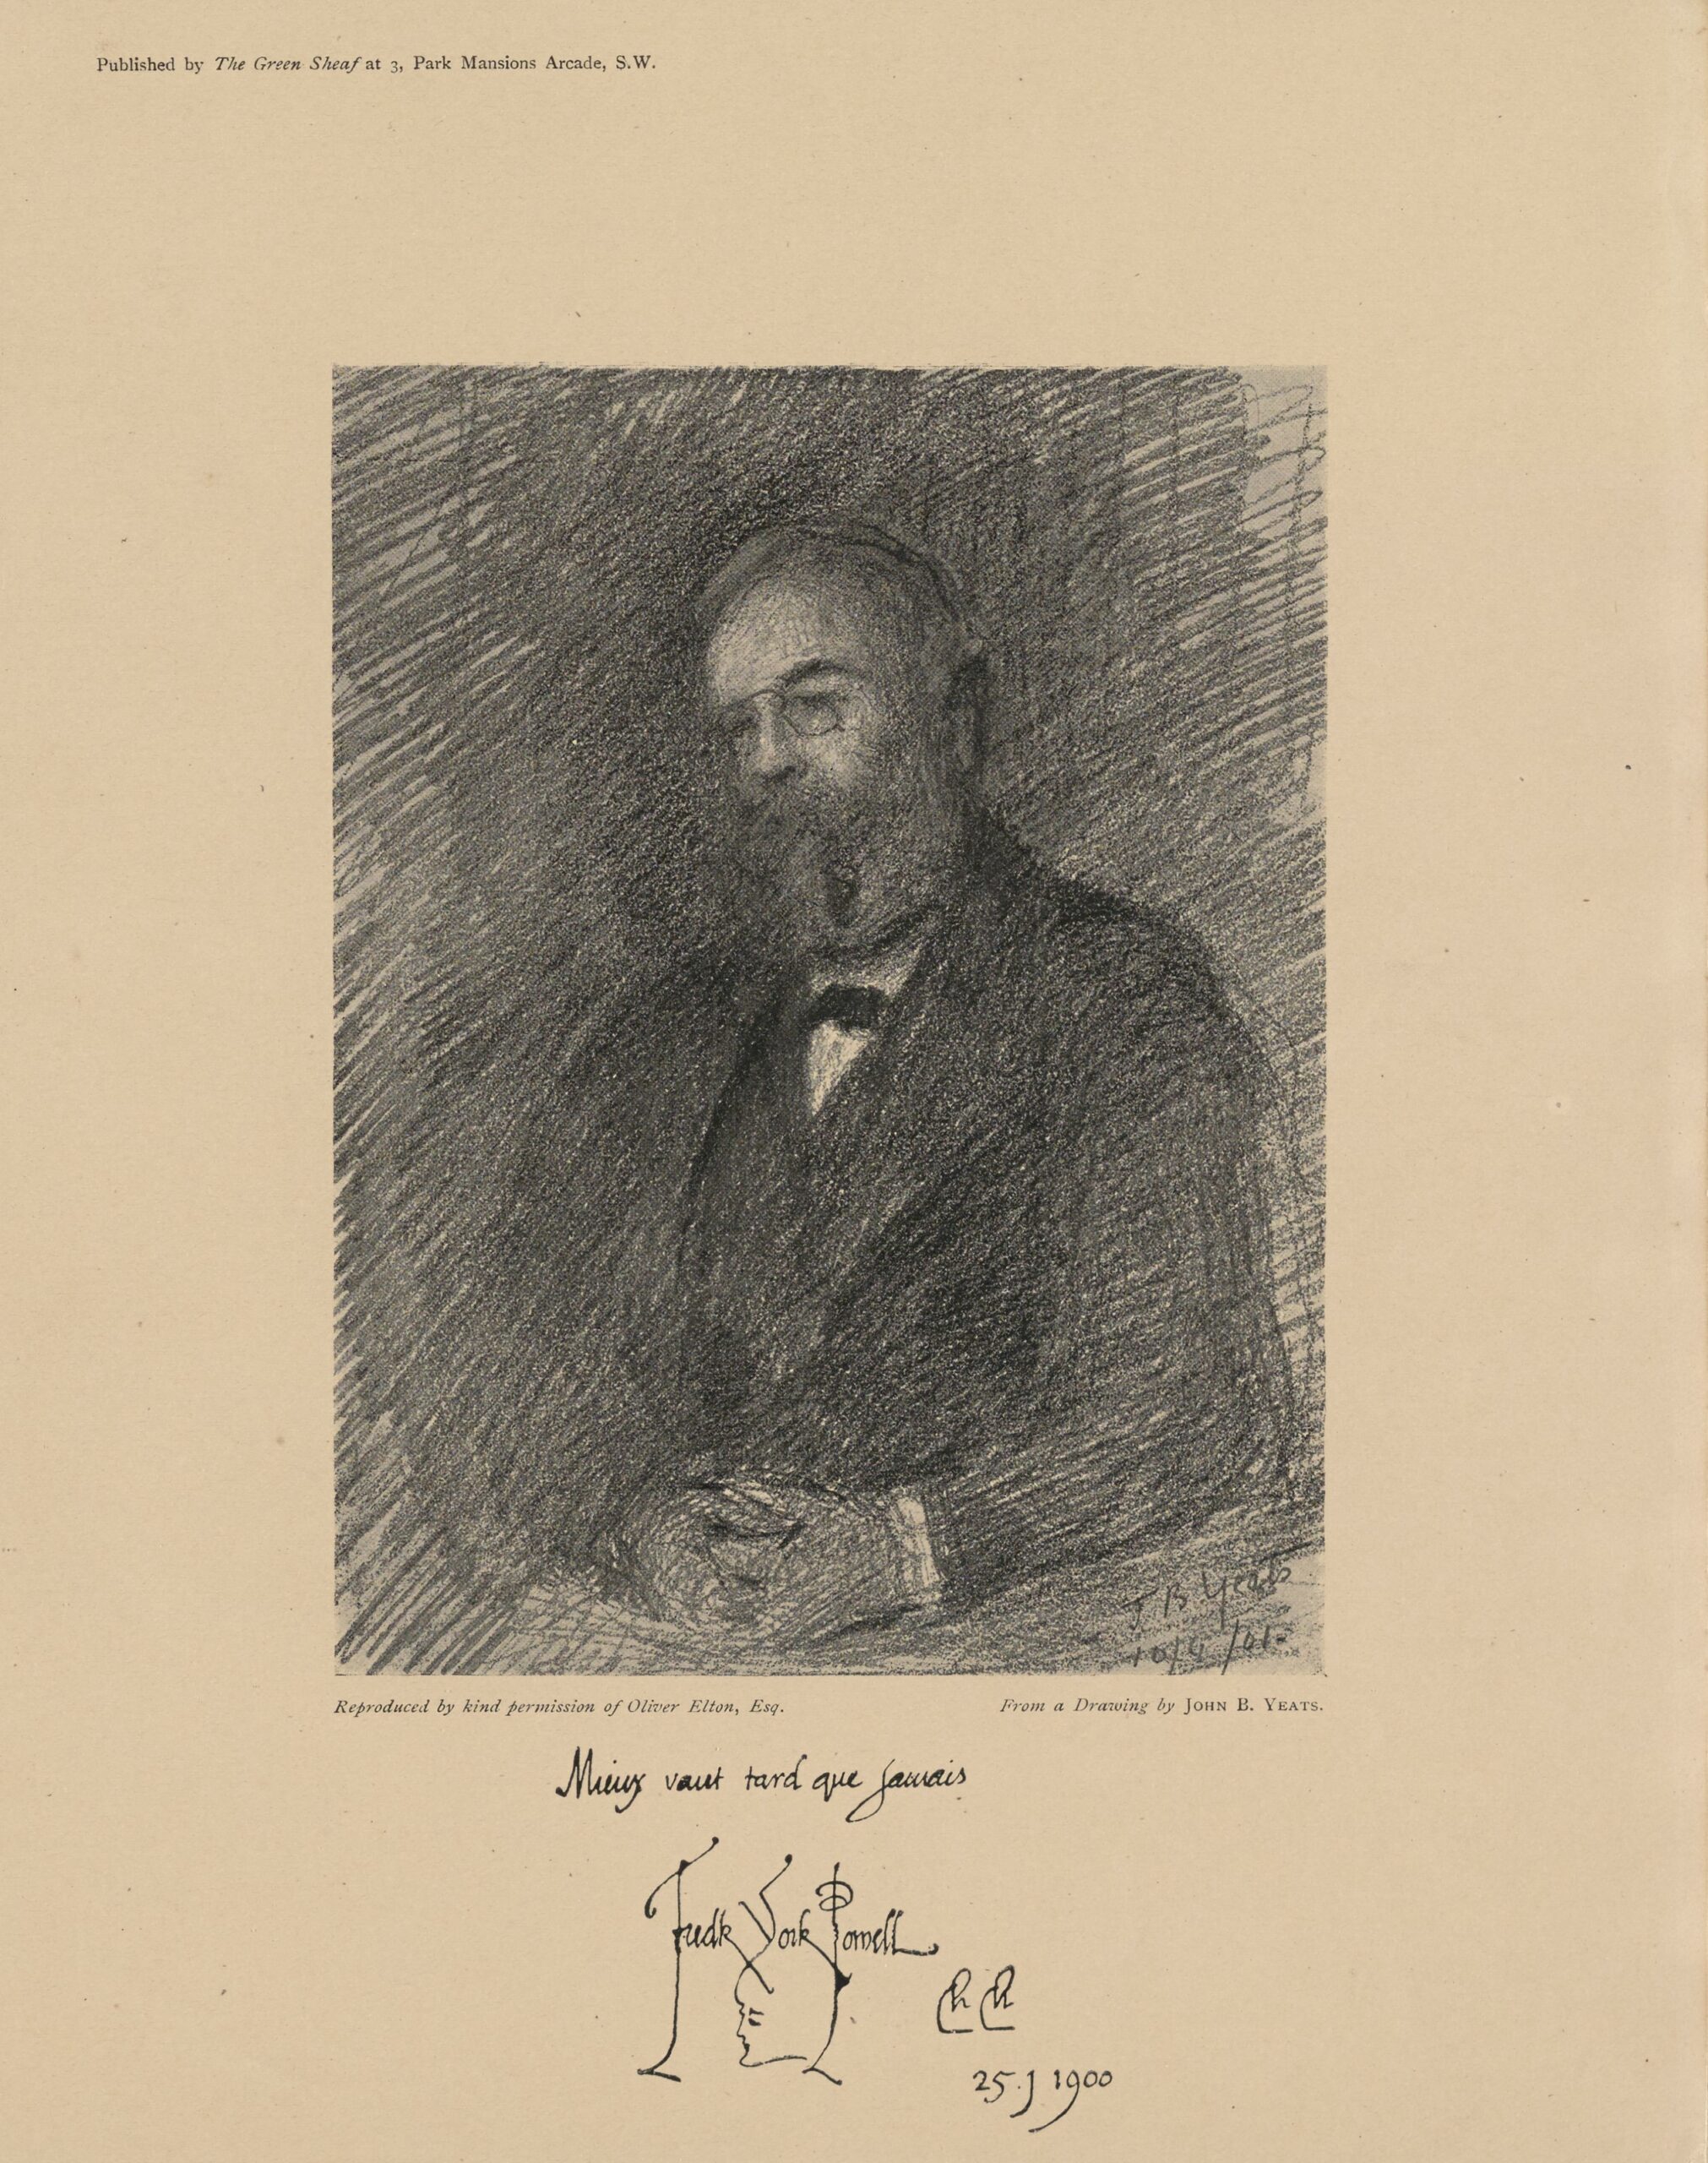 This charcoal portrait of Frederick York-Powell is centered on the page, in rectangular shape, in portrait orientation. It depicts York-Powell from the shoulders up, sitting in three-quarter profile, facing left. He wears a dark vest and suit jacket, white shirt, bow tie, pince-nez, and a beard. In the bottom right corner, the image is signed by the artist and dated 10/04/01. Below the image is printed “Reproduced by kind permission of Oliver Elton, Esq. From a drawing by JOHN B. YEATS.” Below this text is a handwritten note, “Mieux tard que jamais / Fredk York-Powell / Ch Ch / 25 J 1900.” The end of the “Y” in “York-Powell” extends below the name to form the sketched profile of a face.